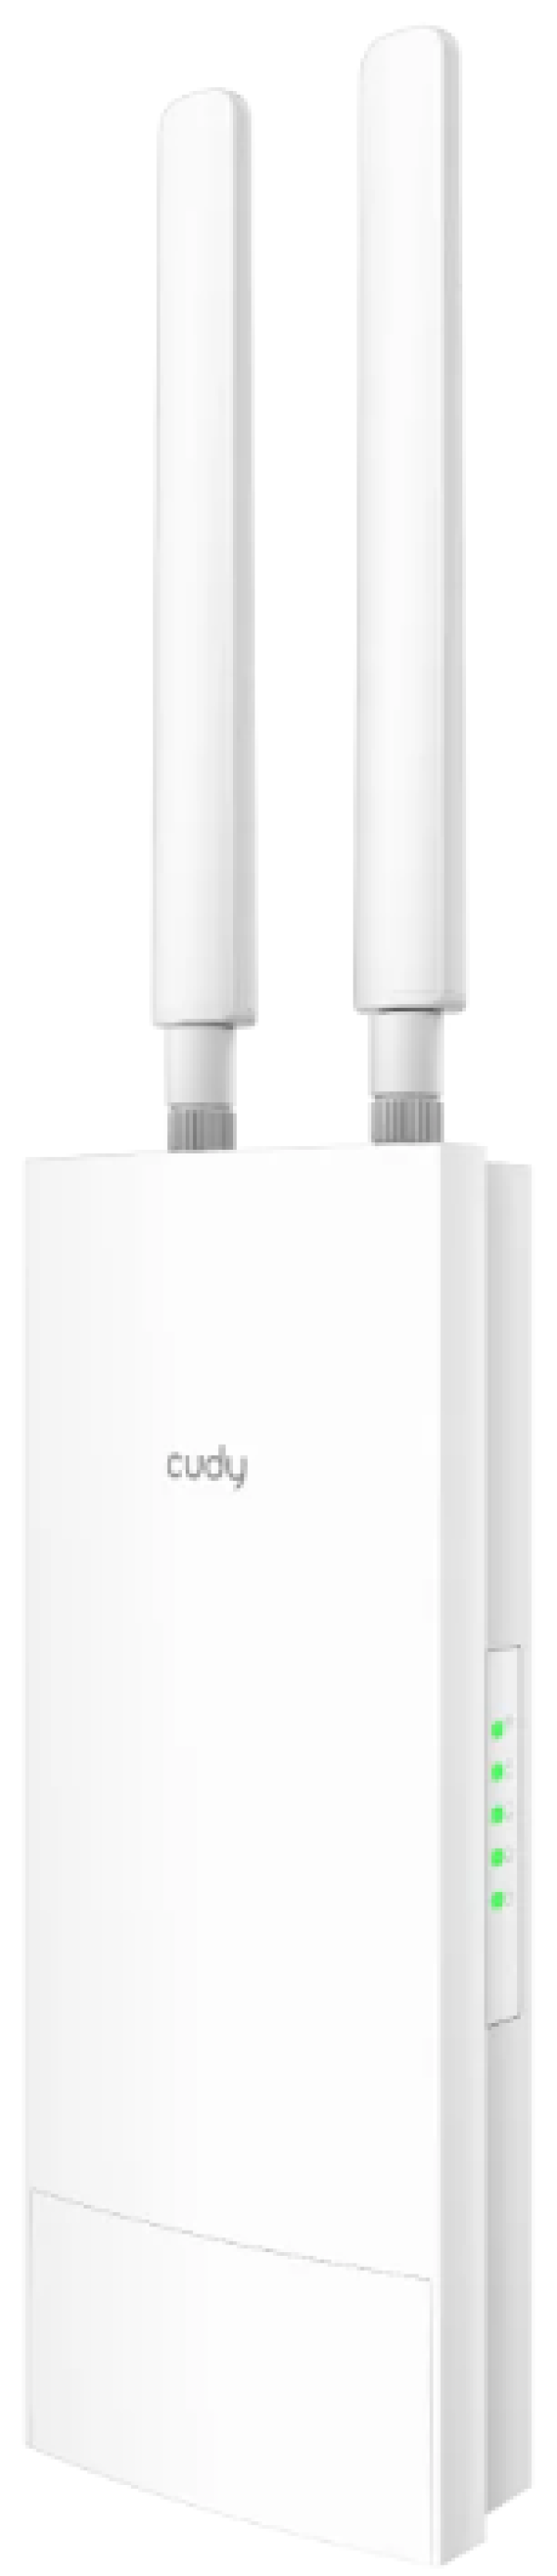 Cudy RE1200 Outdoor AC1200 WiFi Outdoor Repeater